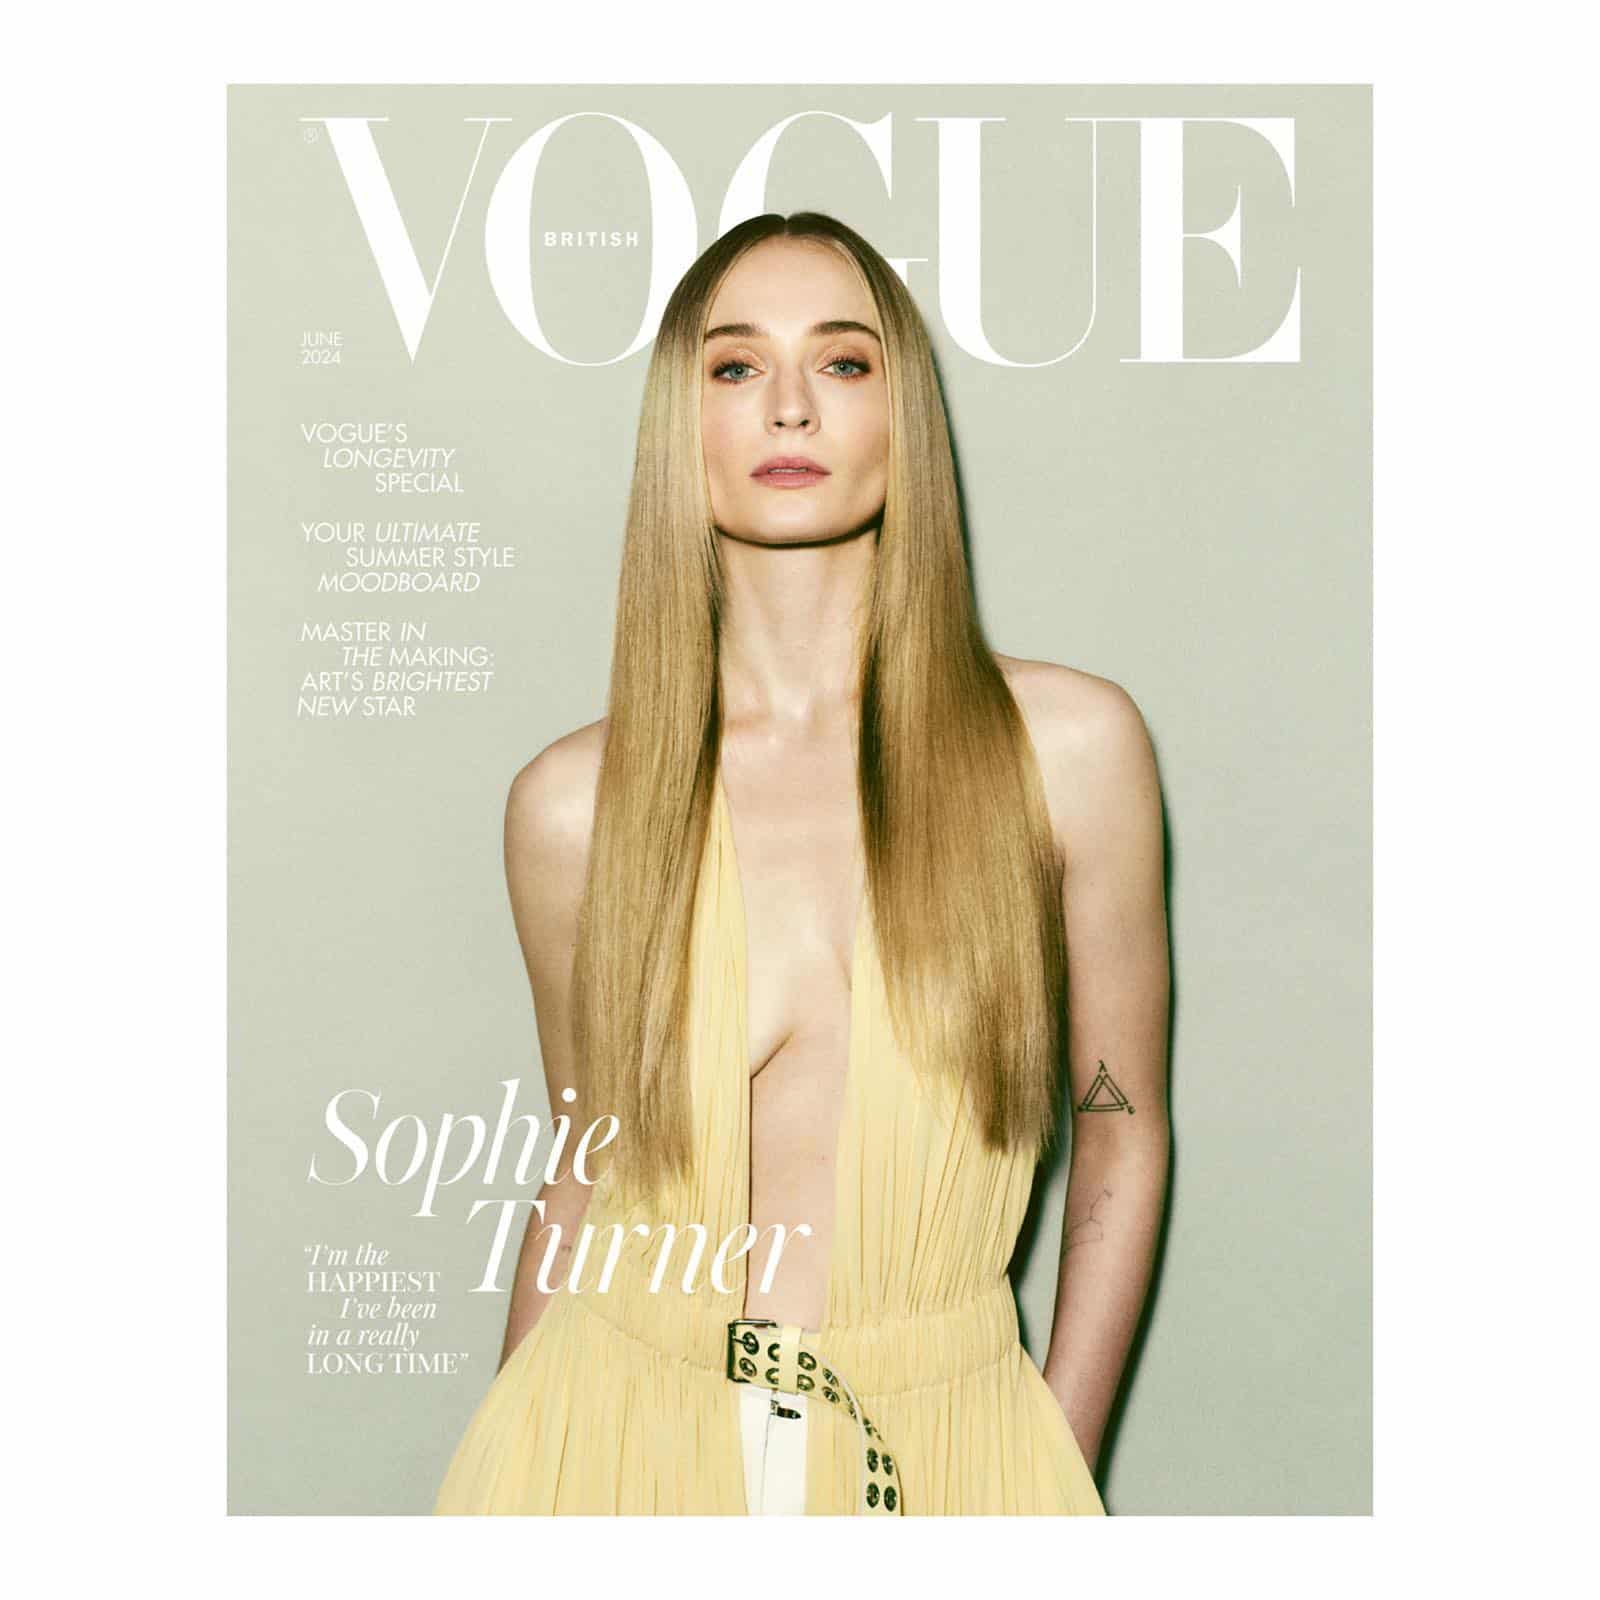 ️ @sophiet covers the June issue of @britishvogue, wearing all @louisvuitton ️

.
.
.

Sophie wears @louisvuitton
Styling: Photography: @mikaeljansson
Hair: @jimmypaulhair
Makeup: @hannah_murray1
Manicure: @adamslee_
Set Design: @gideonponte 
Production: @holmesproduction
With thanks to @castlegibson

.
.
.